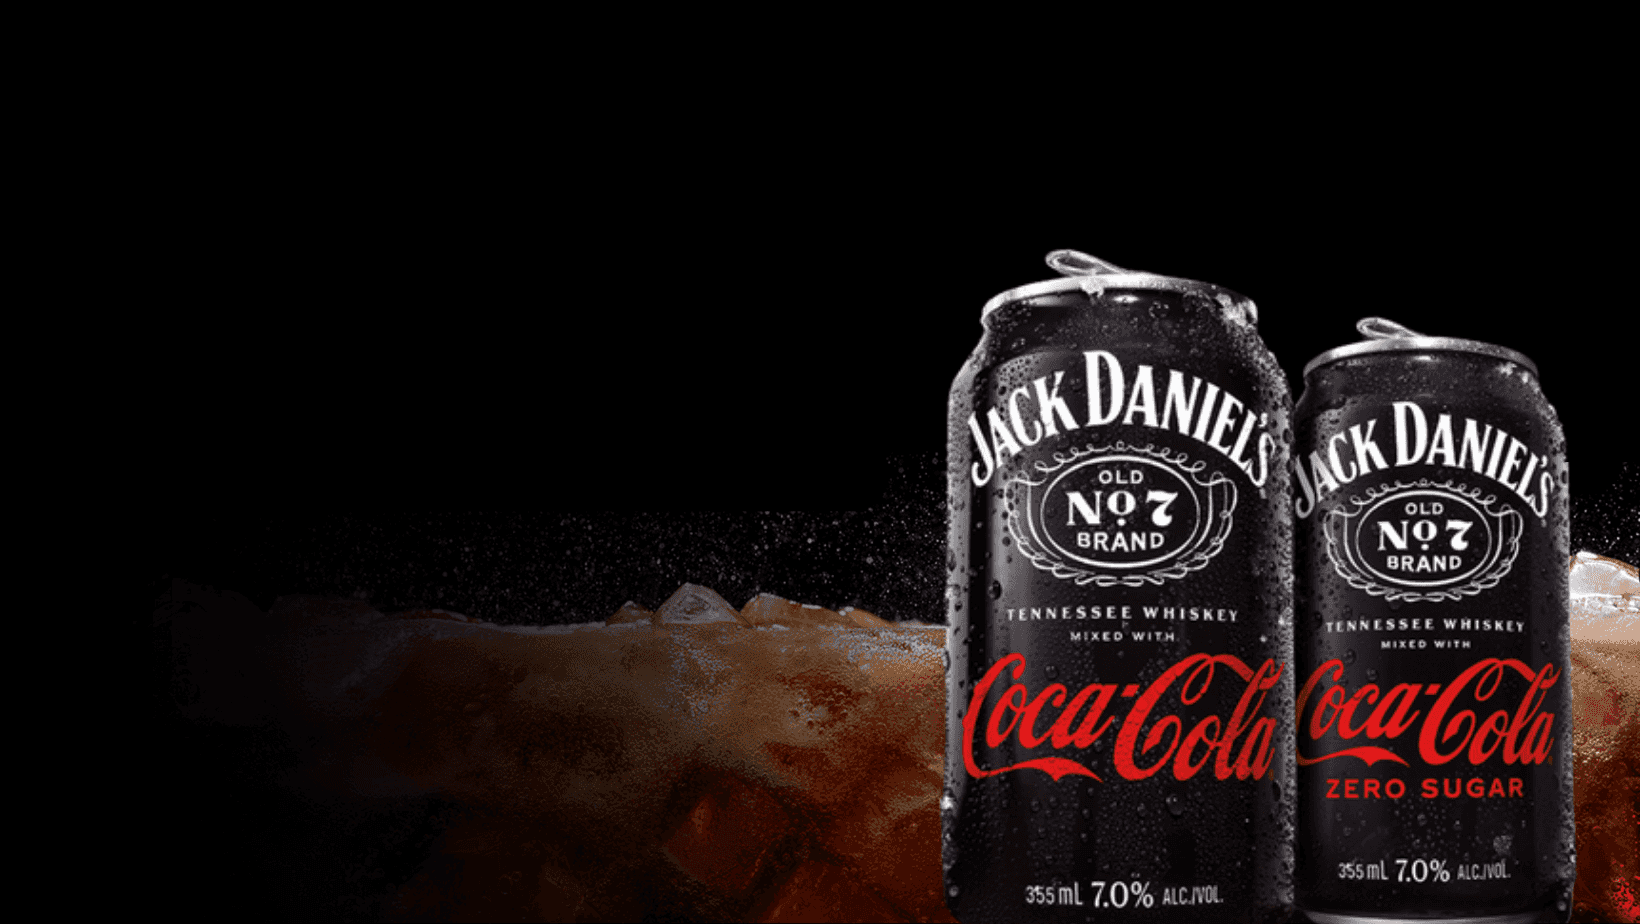 Coca-Cola x Jack Daniel's drink now available in PH